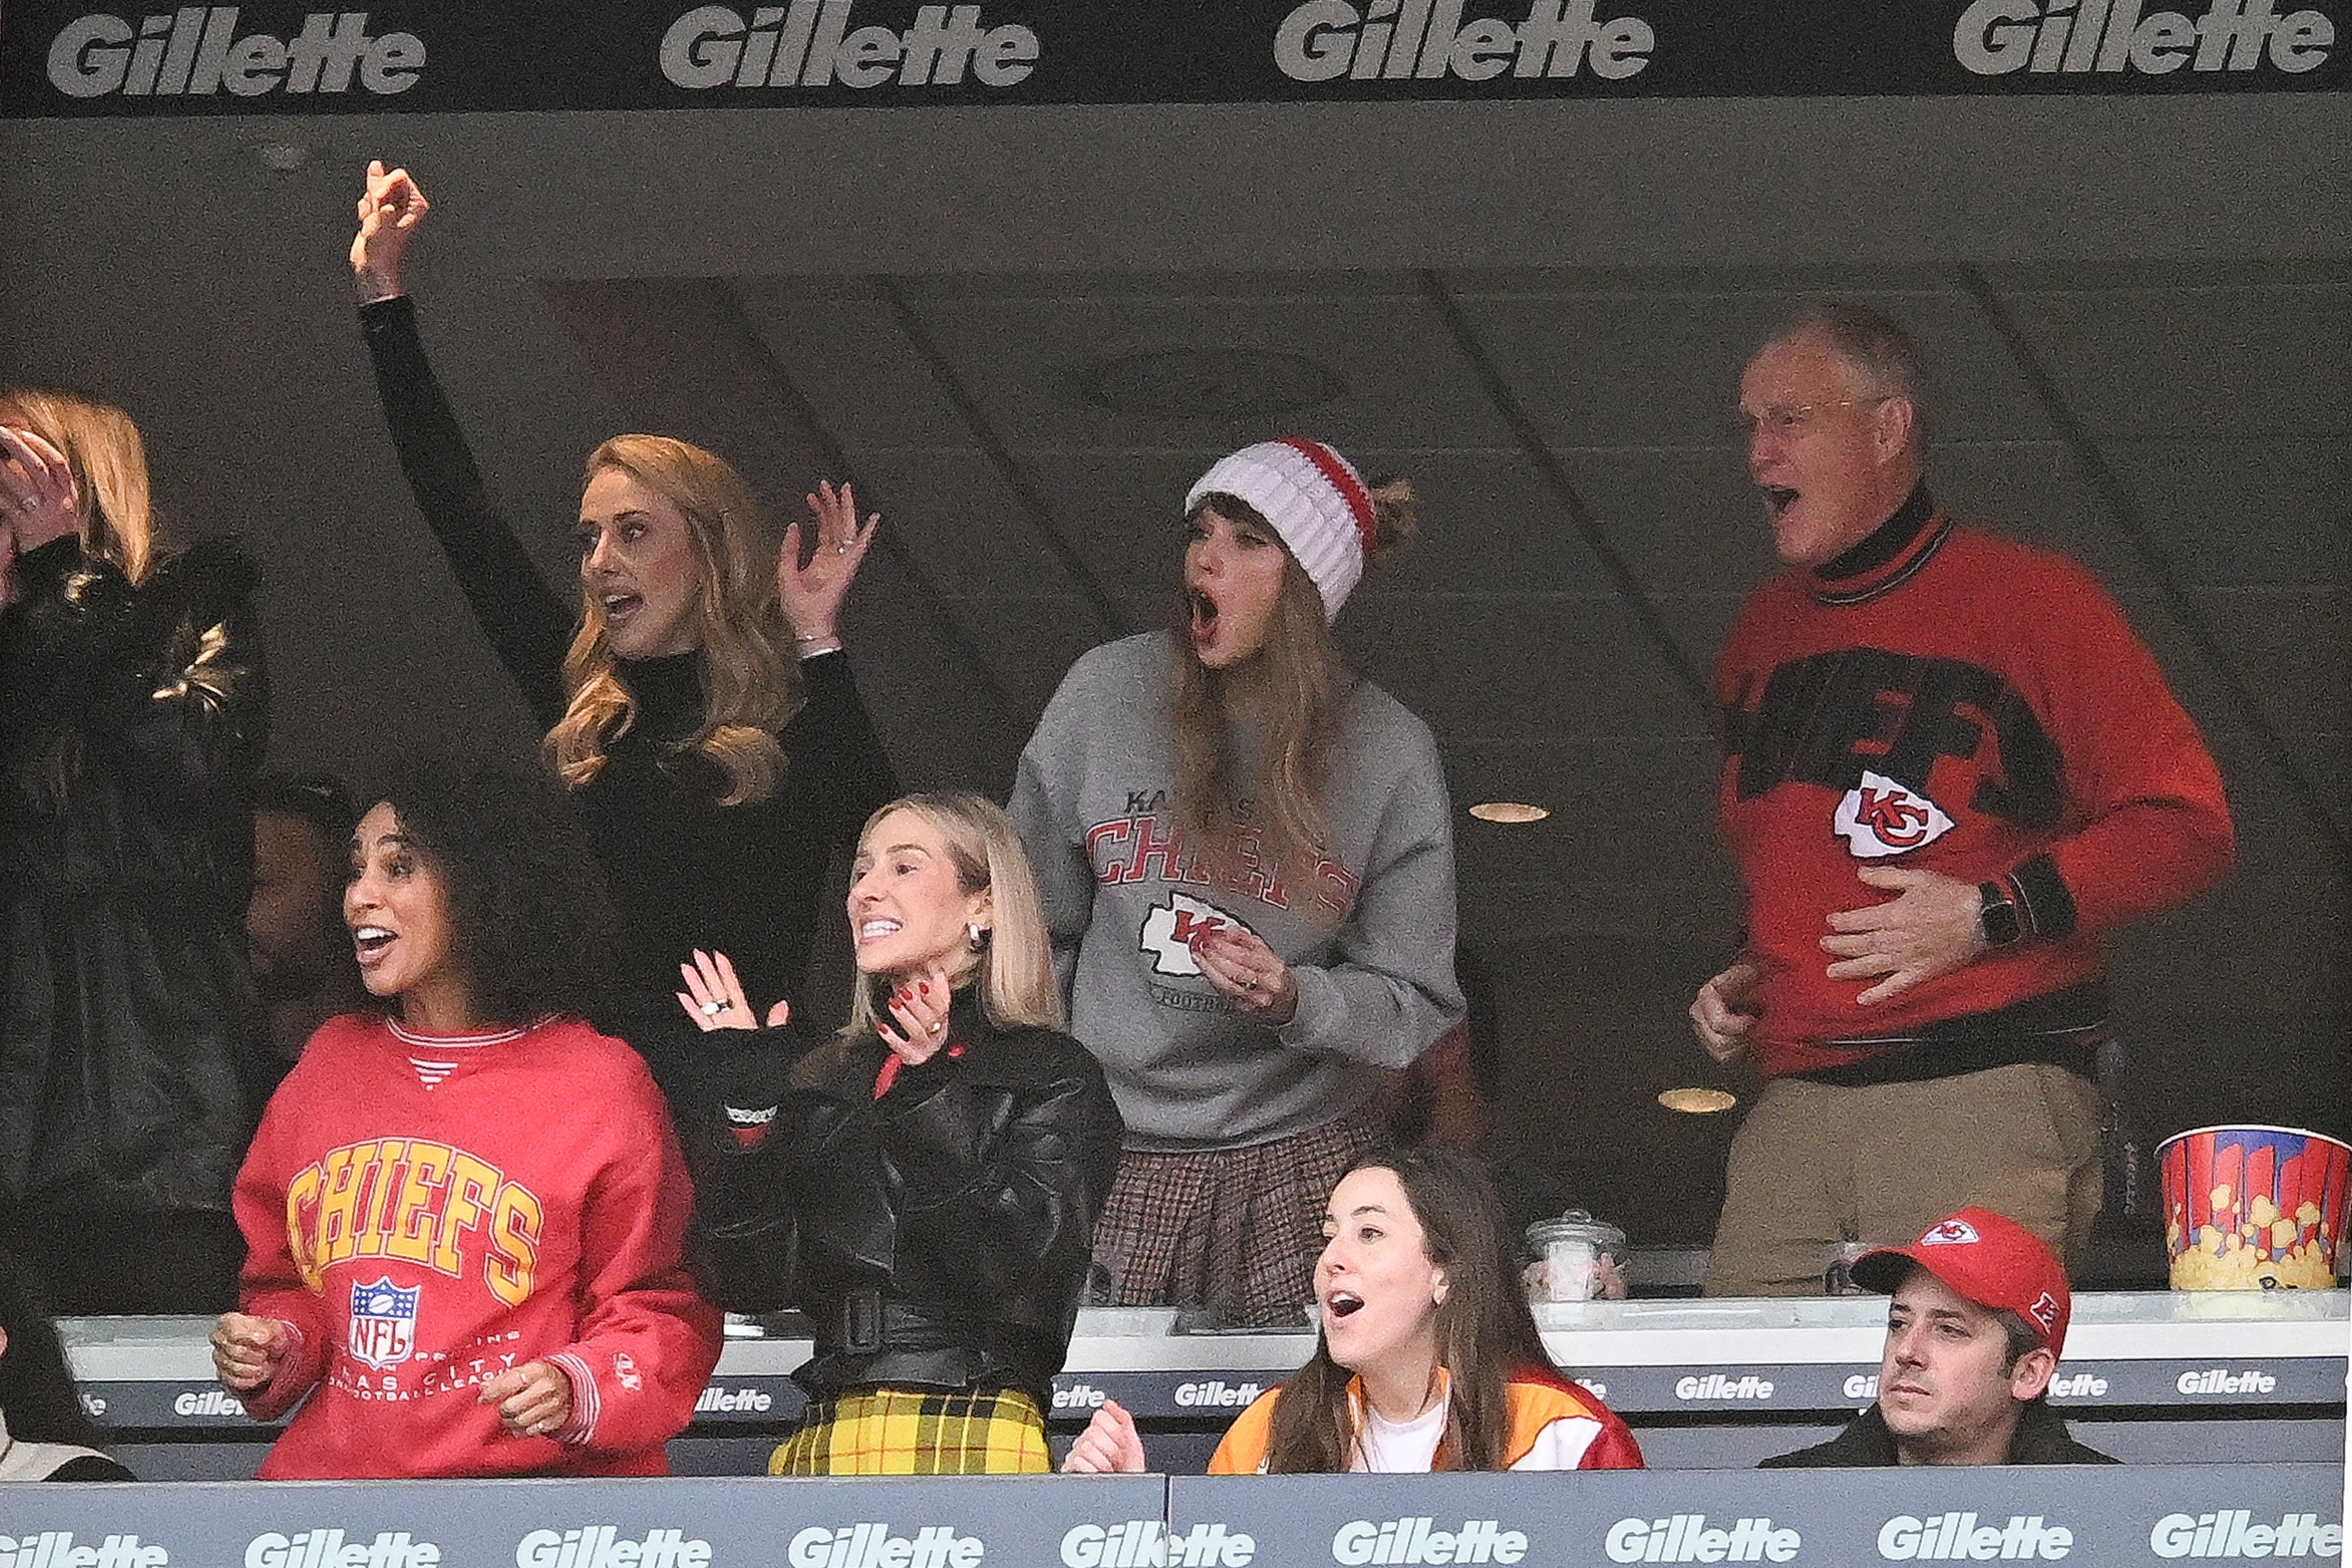 Taylor Swift and her dad with Brittany Mahomes.